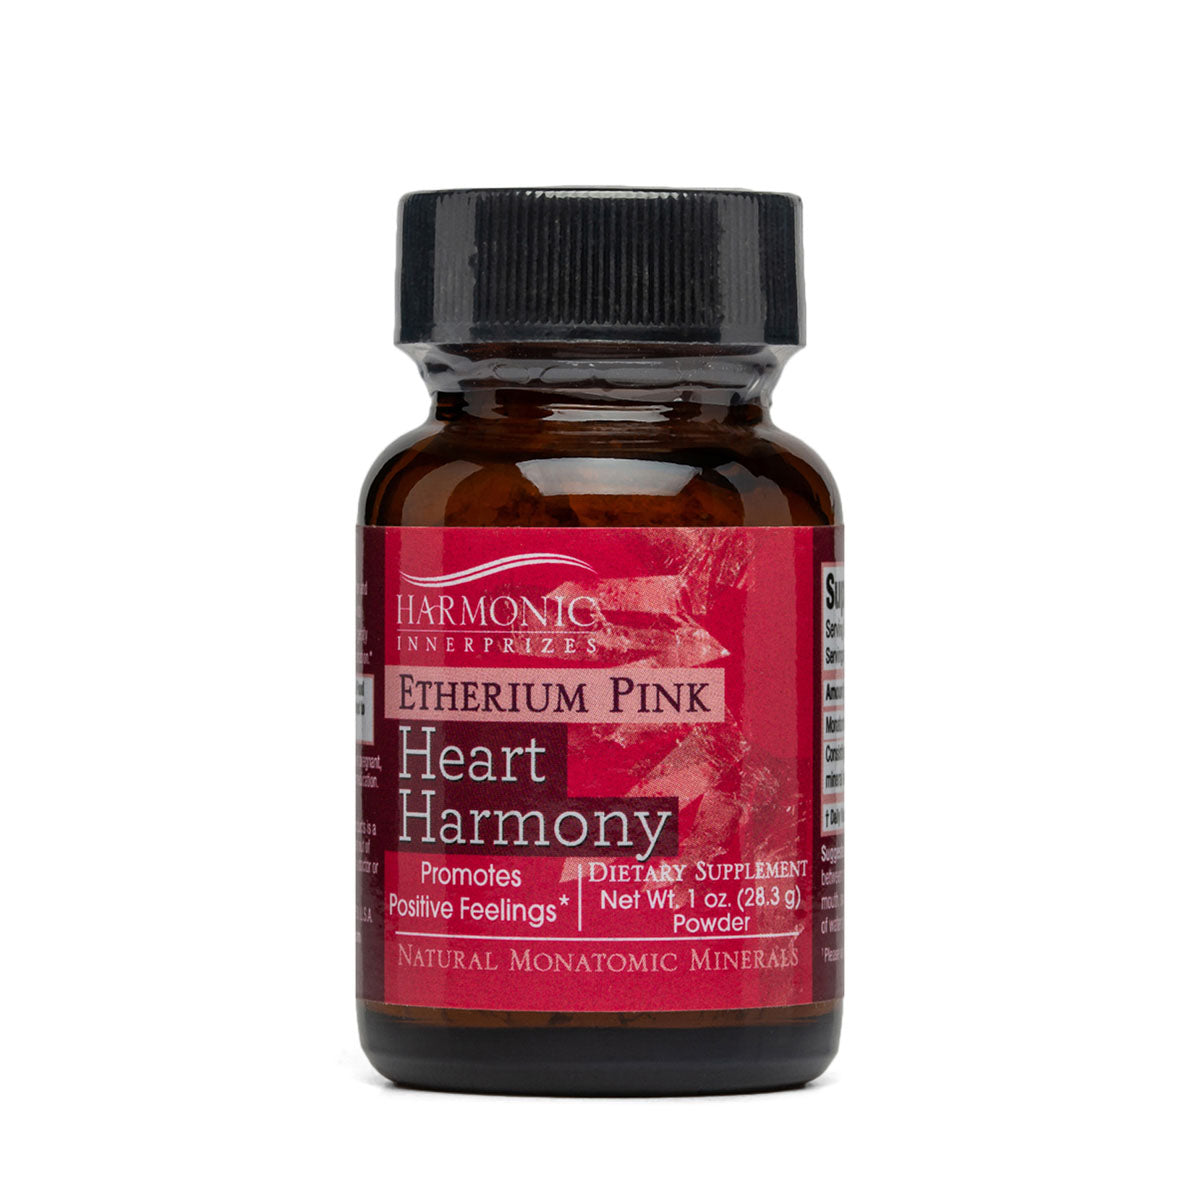 Etherium Pink Powder (1oz) | Harmonic Innerprizes | Raw Living UK | Supplements | Harmonic Innerprizes Etherium Pink (Heart Harmony) acts as a mood lifter and facilitates “letting go”. Use to open the heart and to release old emotions.